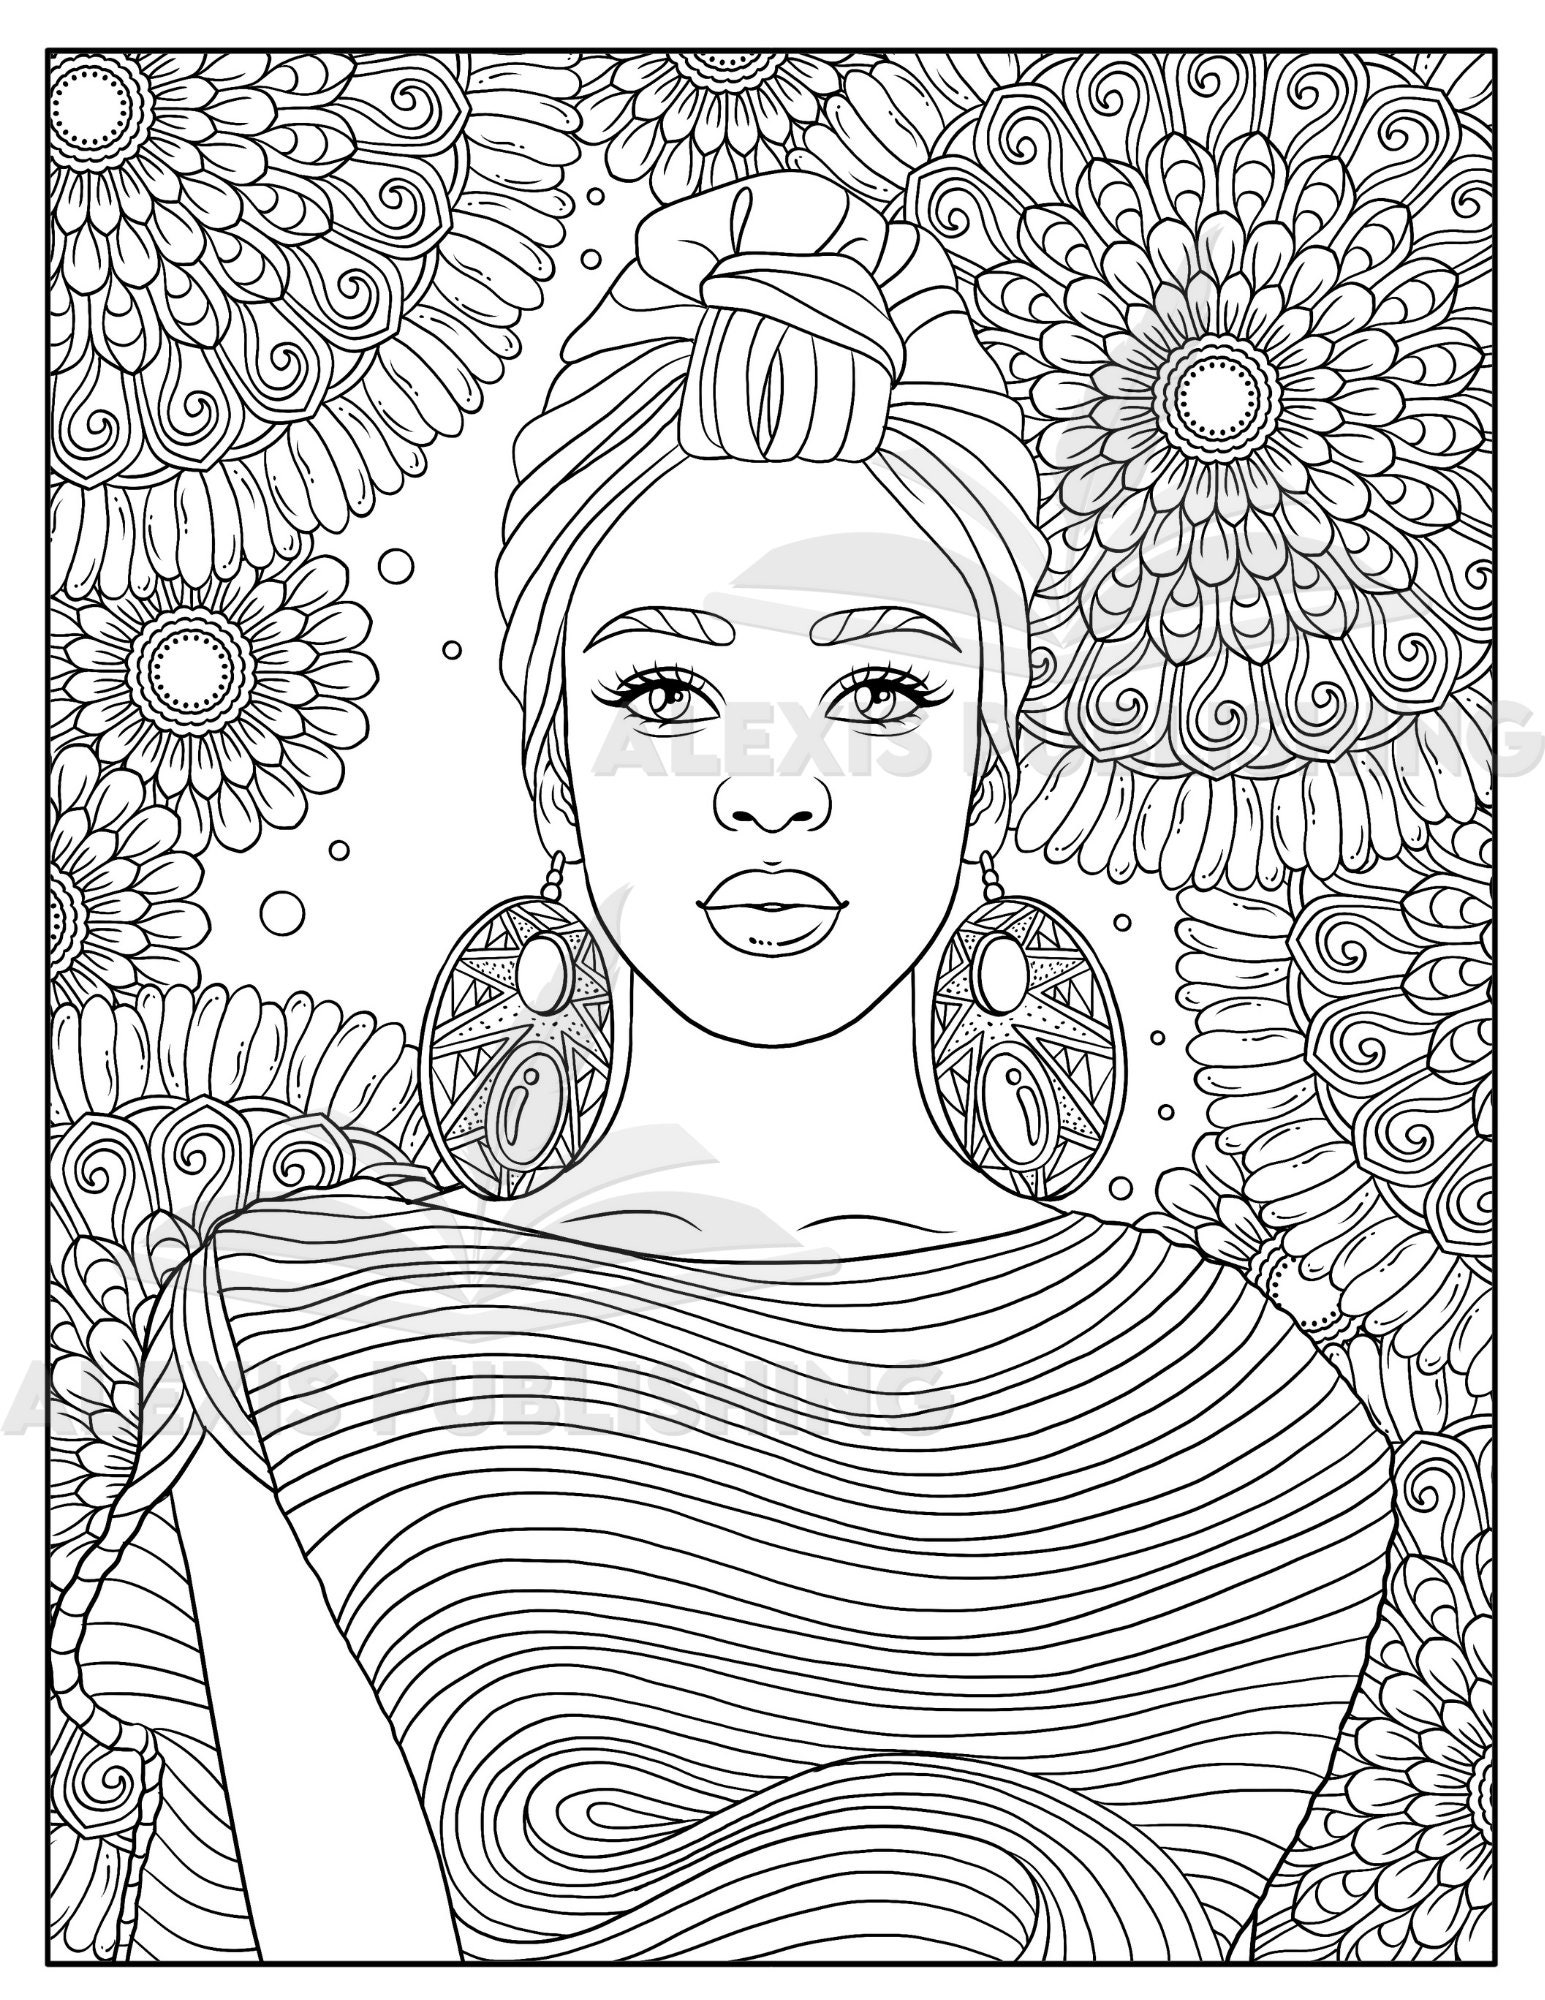 Black Women: Coloring Book 12 Brown Girls Illustrations Printable Pages for  Stress Relieving, for Relaxation Volume 3 